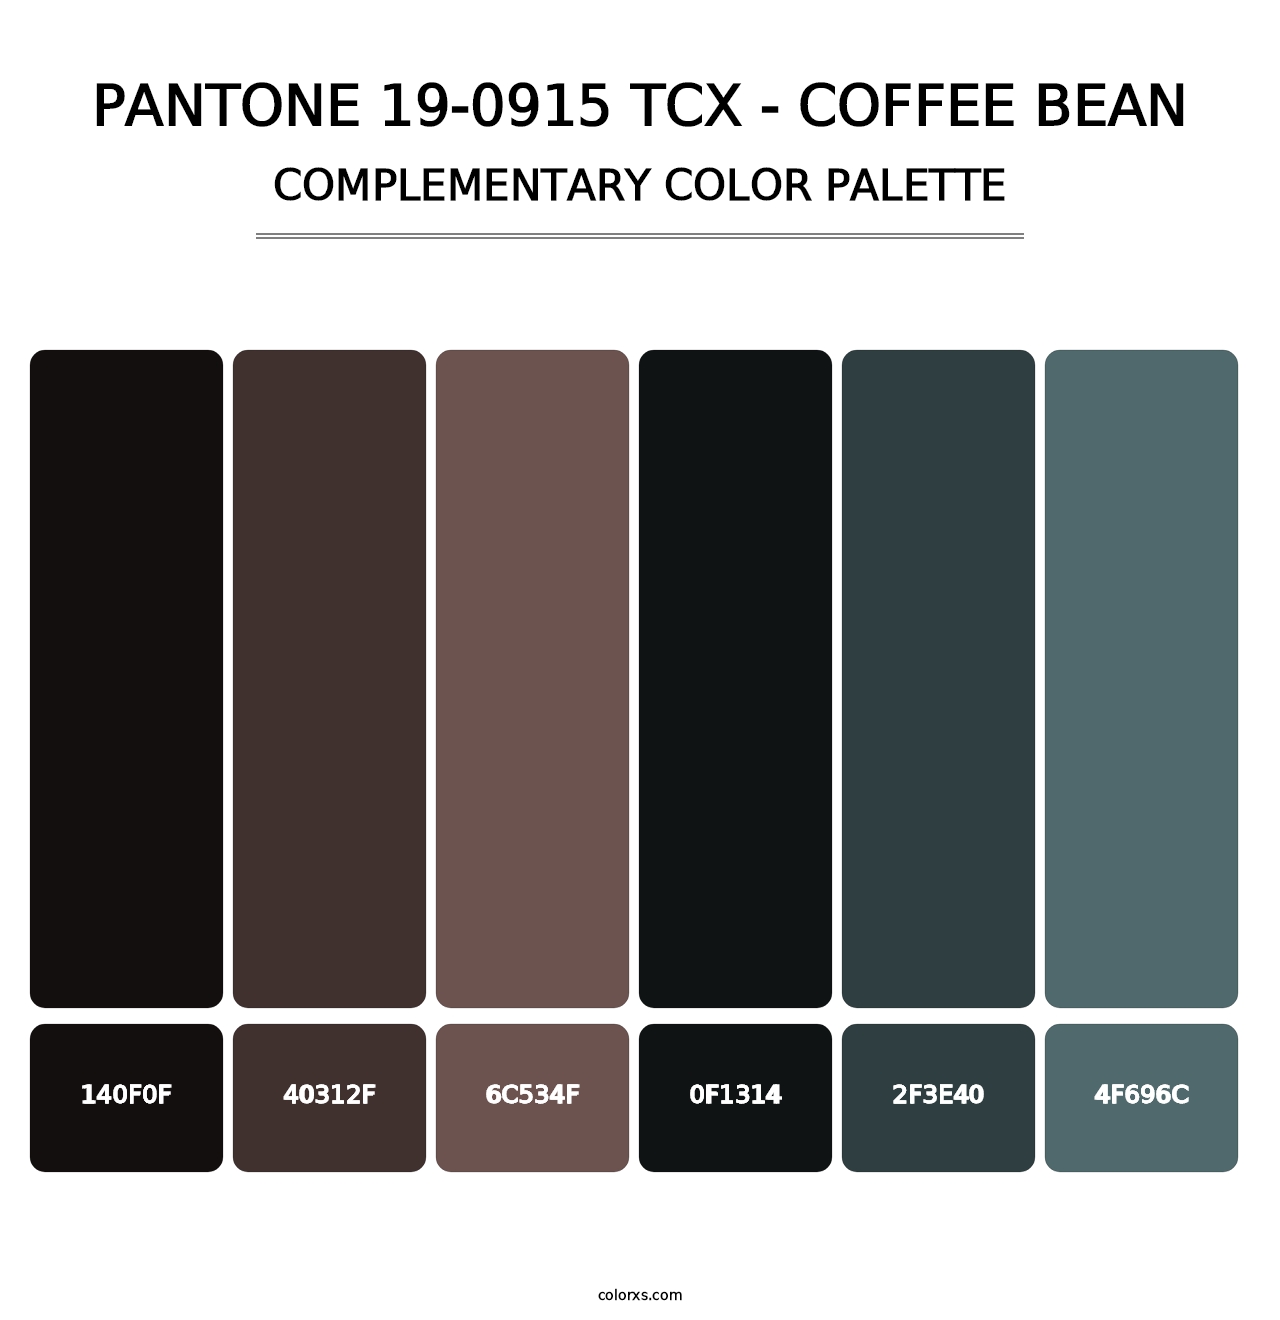 PANTONE 19-0915 TCX - Coffee Bean - Complementary Color Palette